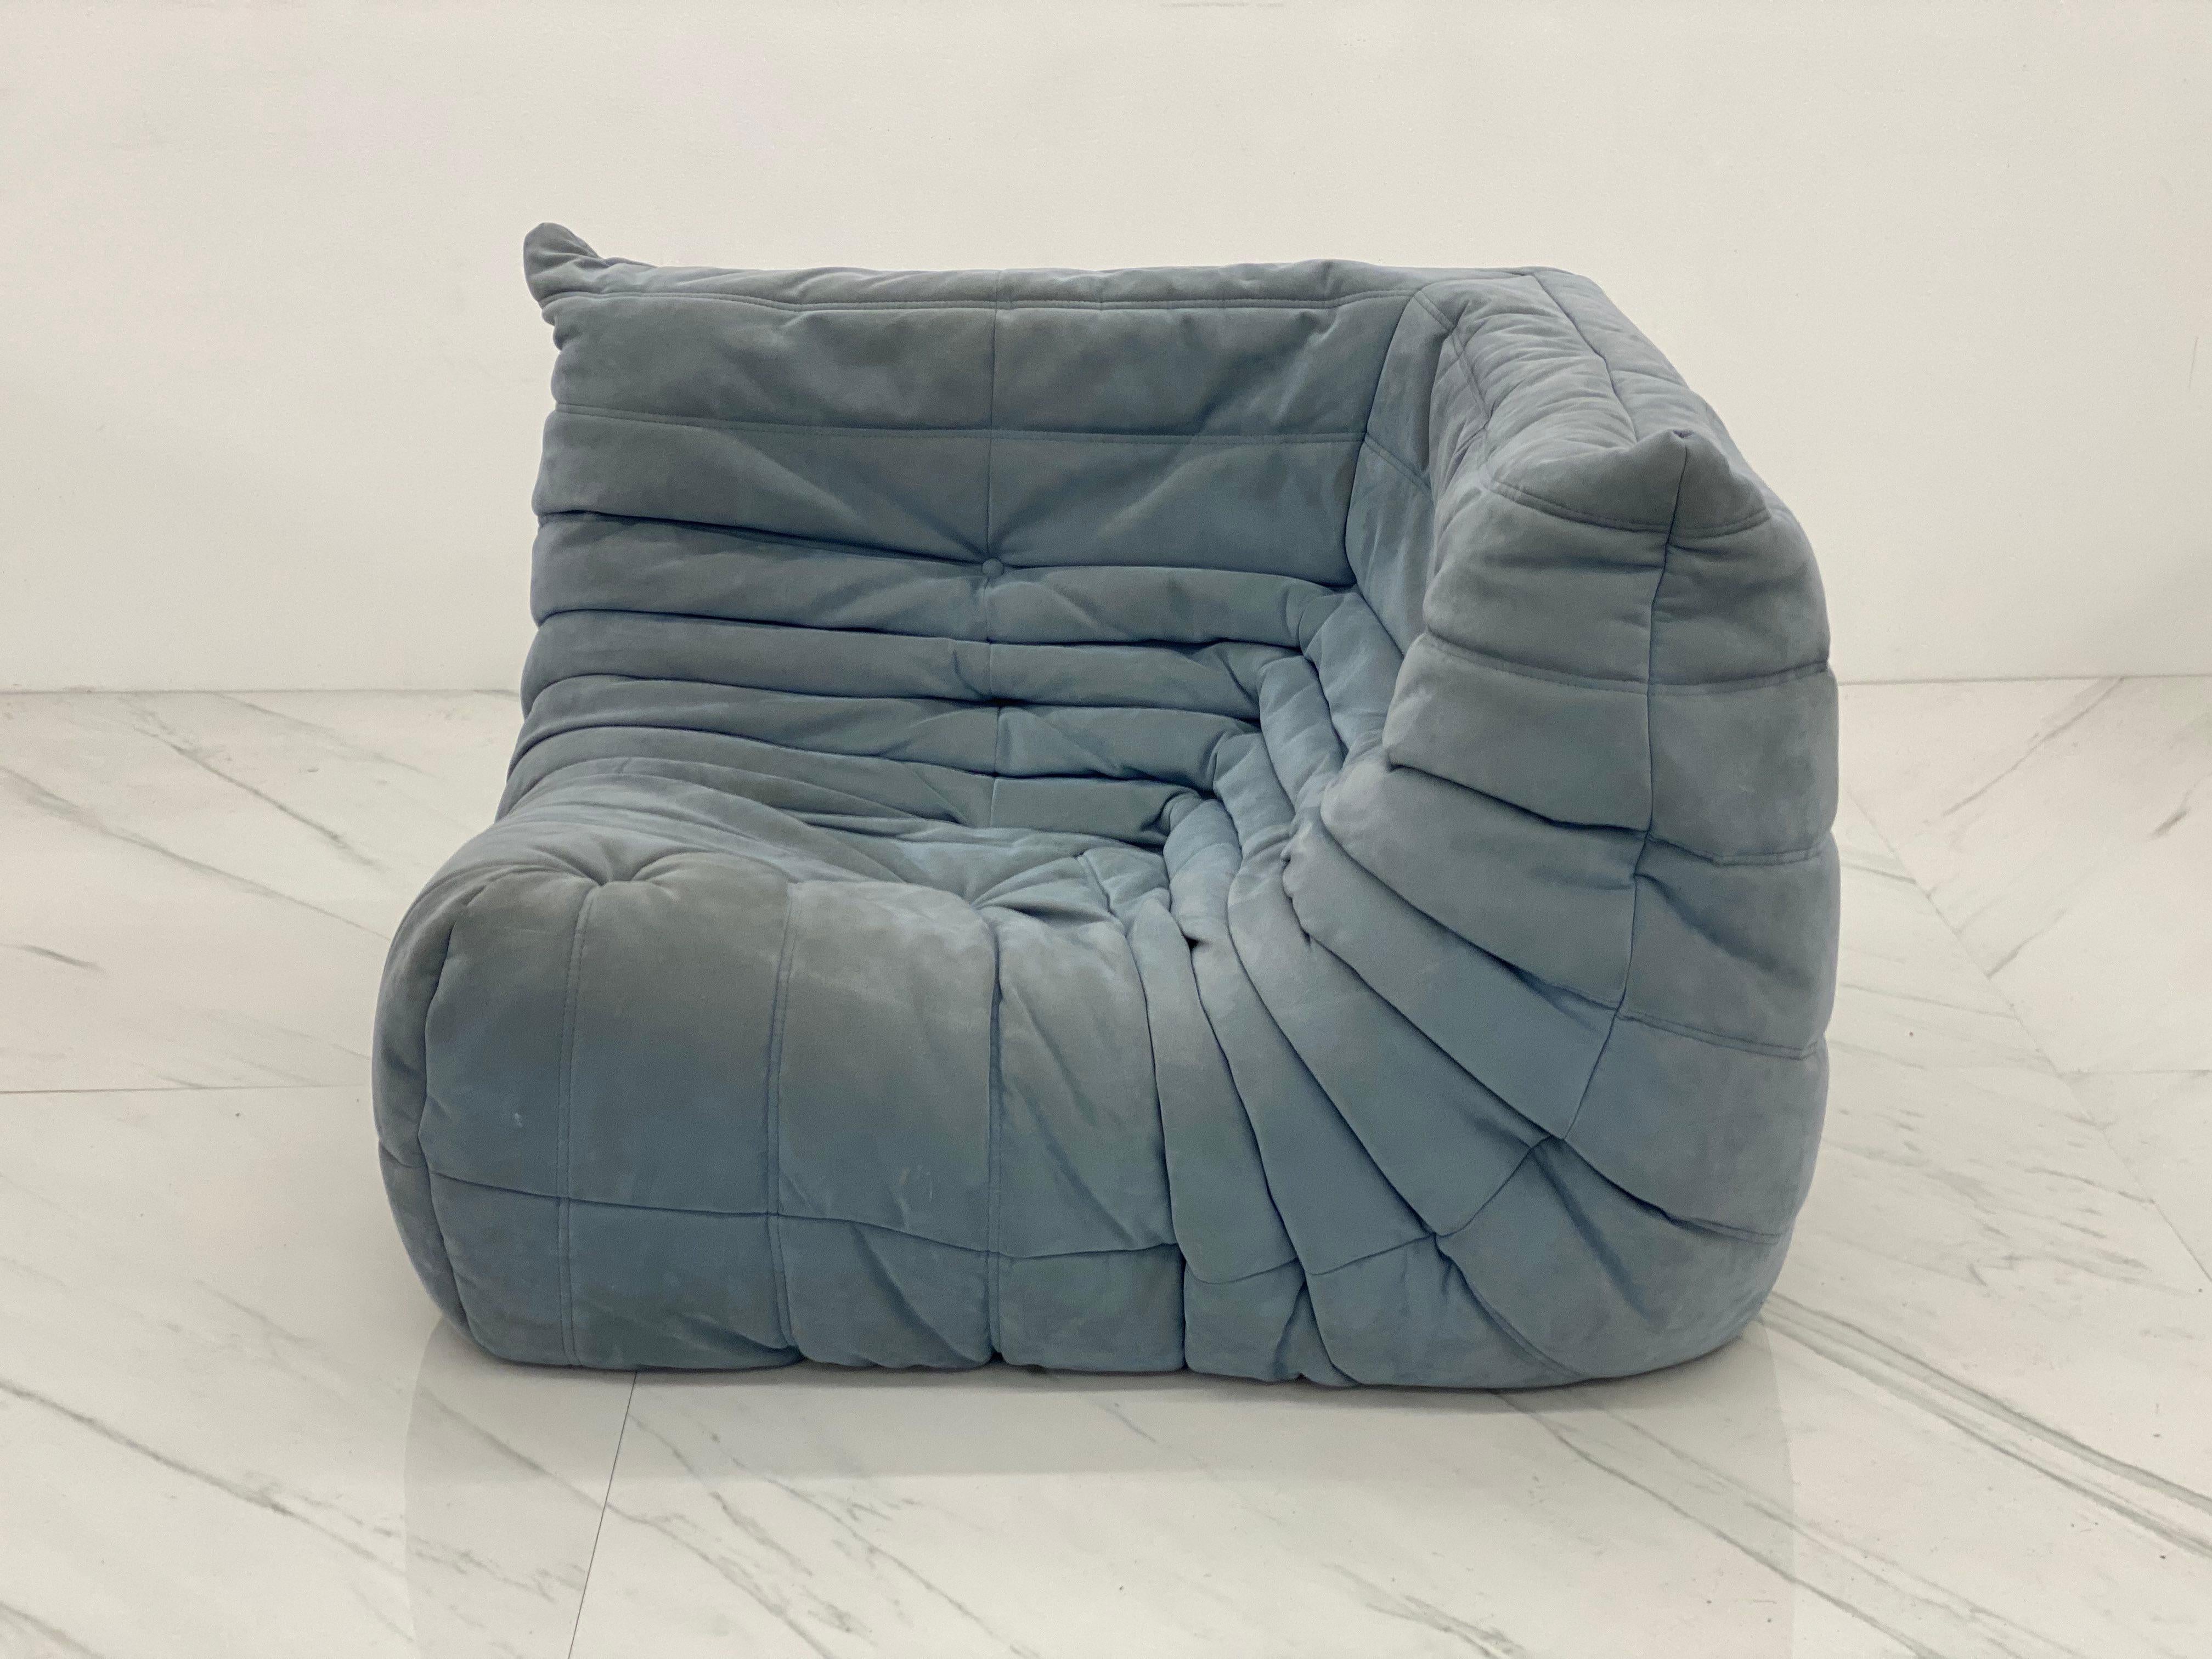 Baby Blue 'Togo' Sectional Sofa by Michel Ducaroy for Ligne Roset, Signed 3